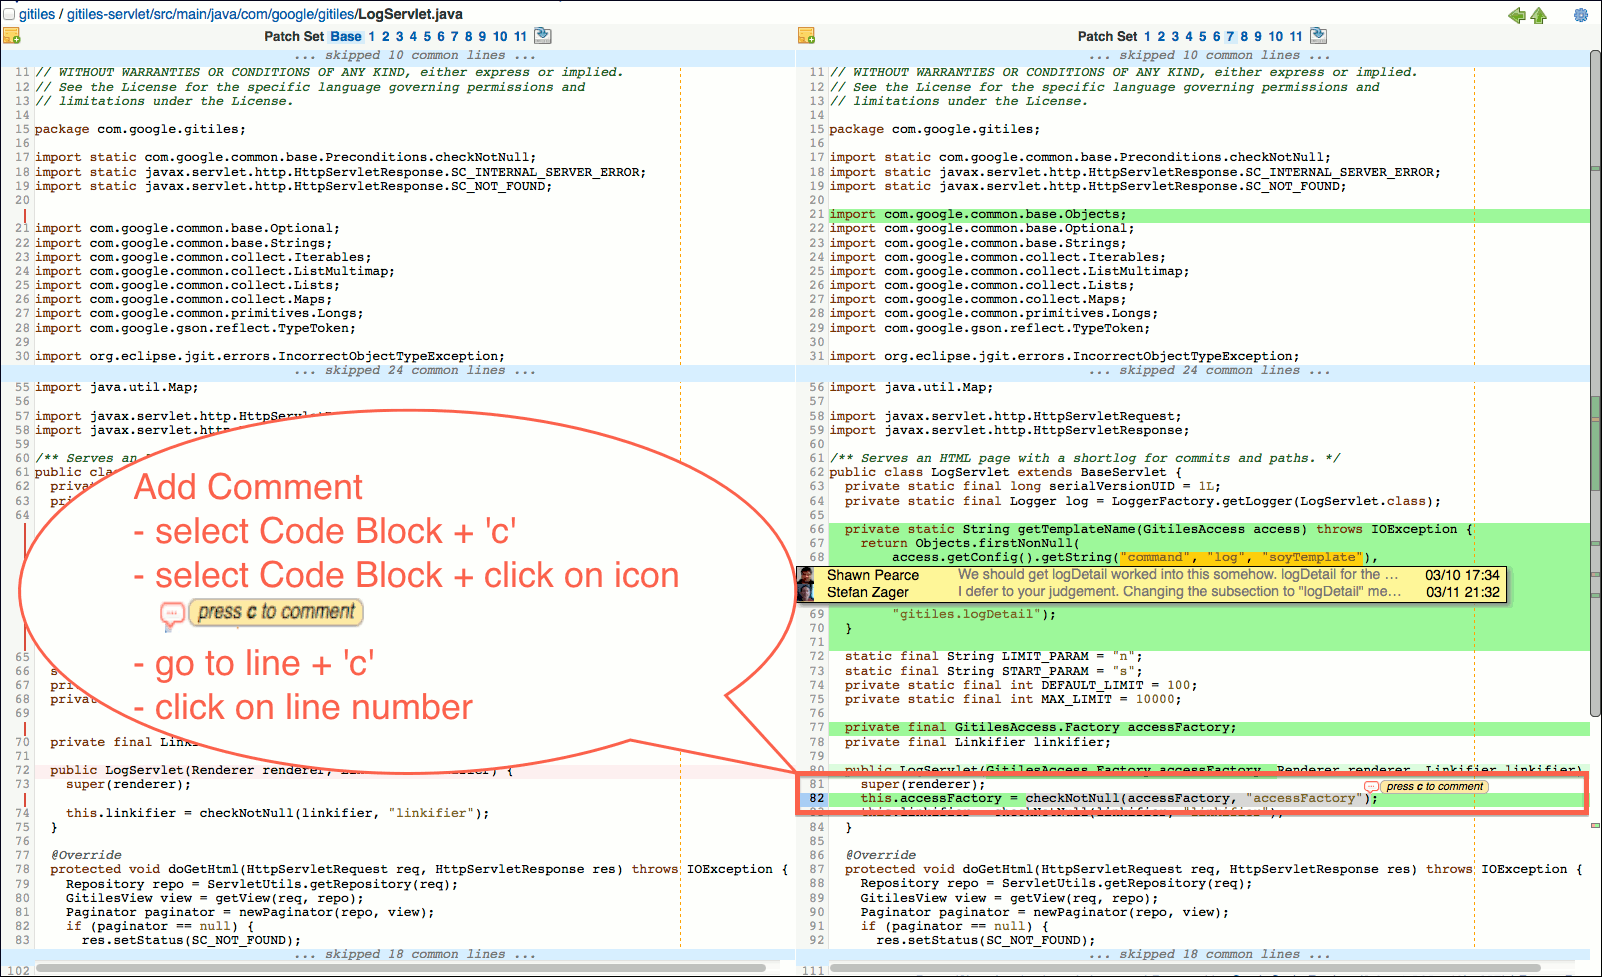 gwt user review ui side by side diff screen comment